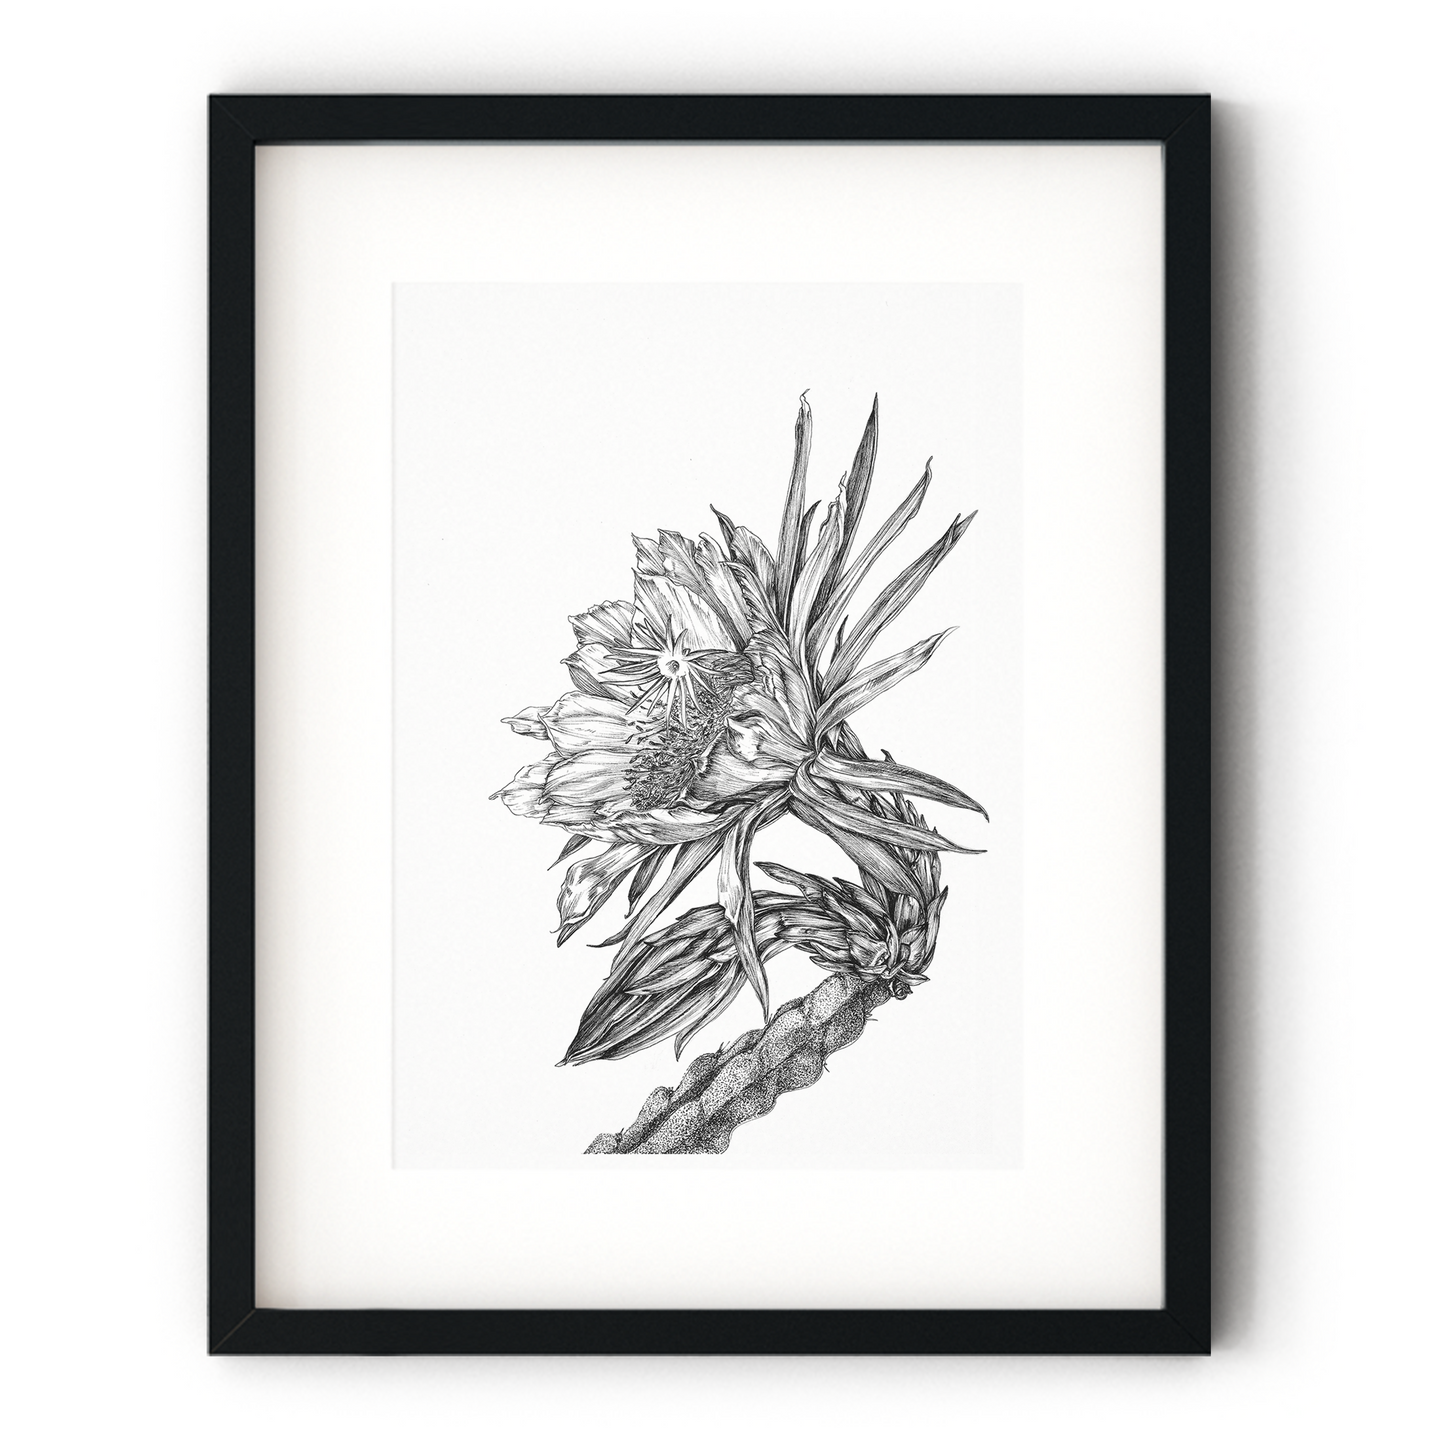 Painting & Drawing: Morgan Snyder [Dragon Fruit Flower]